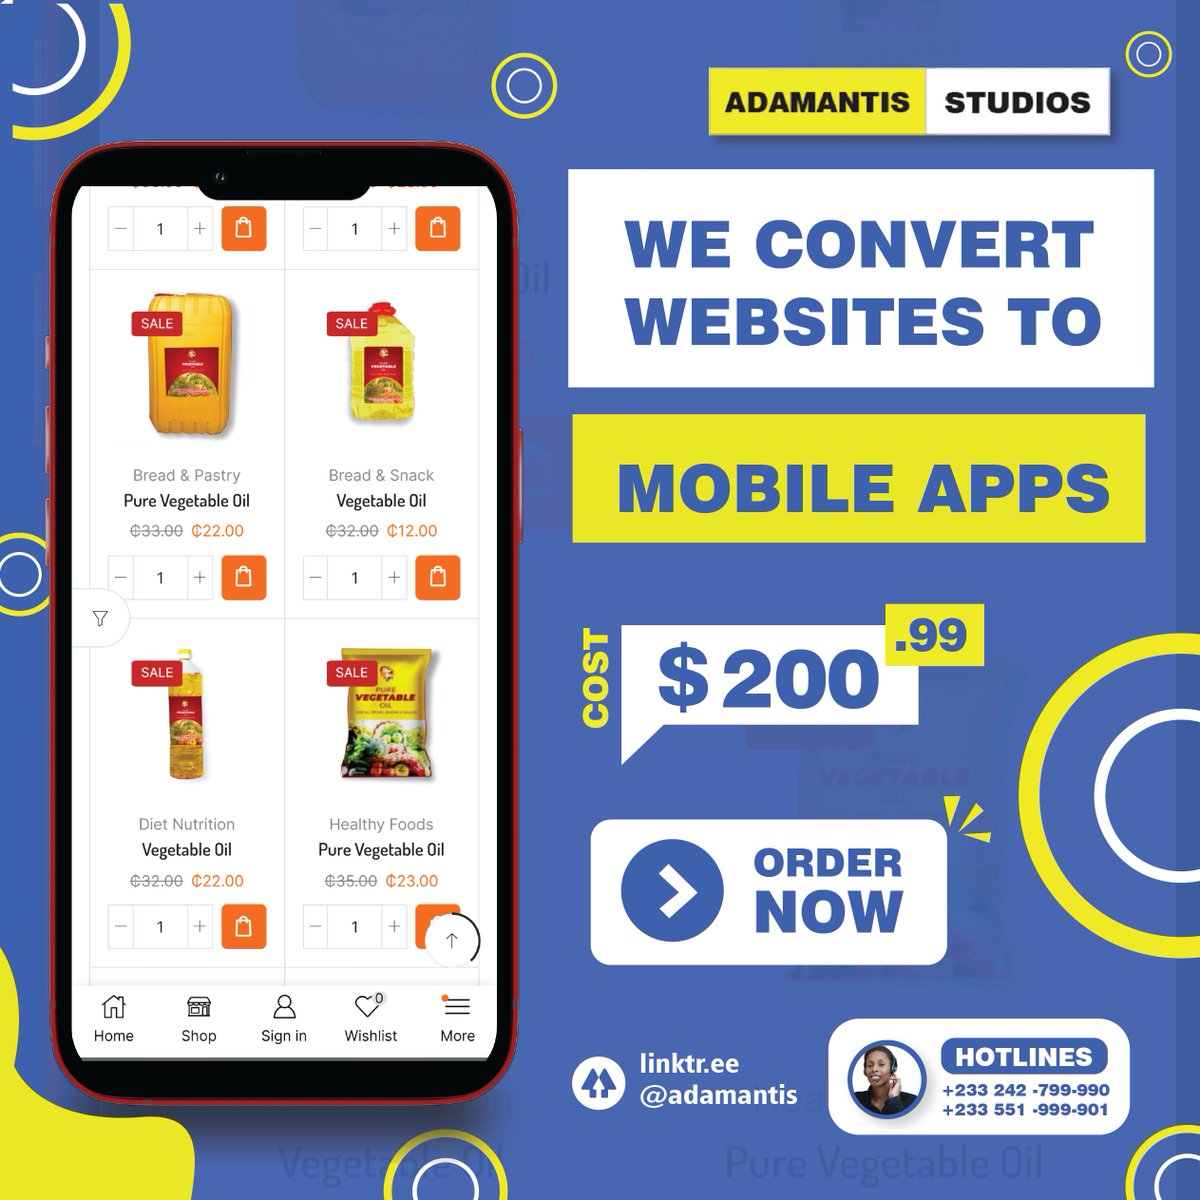 Contact us today and experience the power of a customized Android app

For More Information, Simply Contact Us Here:
wa.me/233242799990

Or Call us: 0242799990 or 0551999901

#MobileAppDevelopment #WebsiteConversion #BrandVisibility #UserExperience #CustomerEngagement